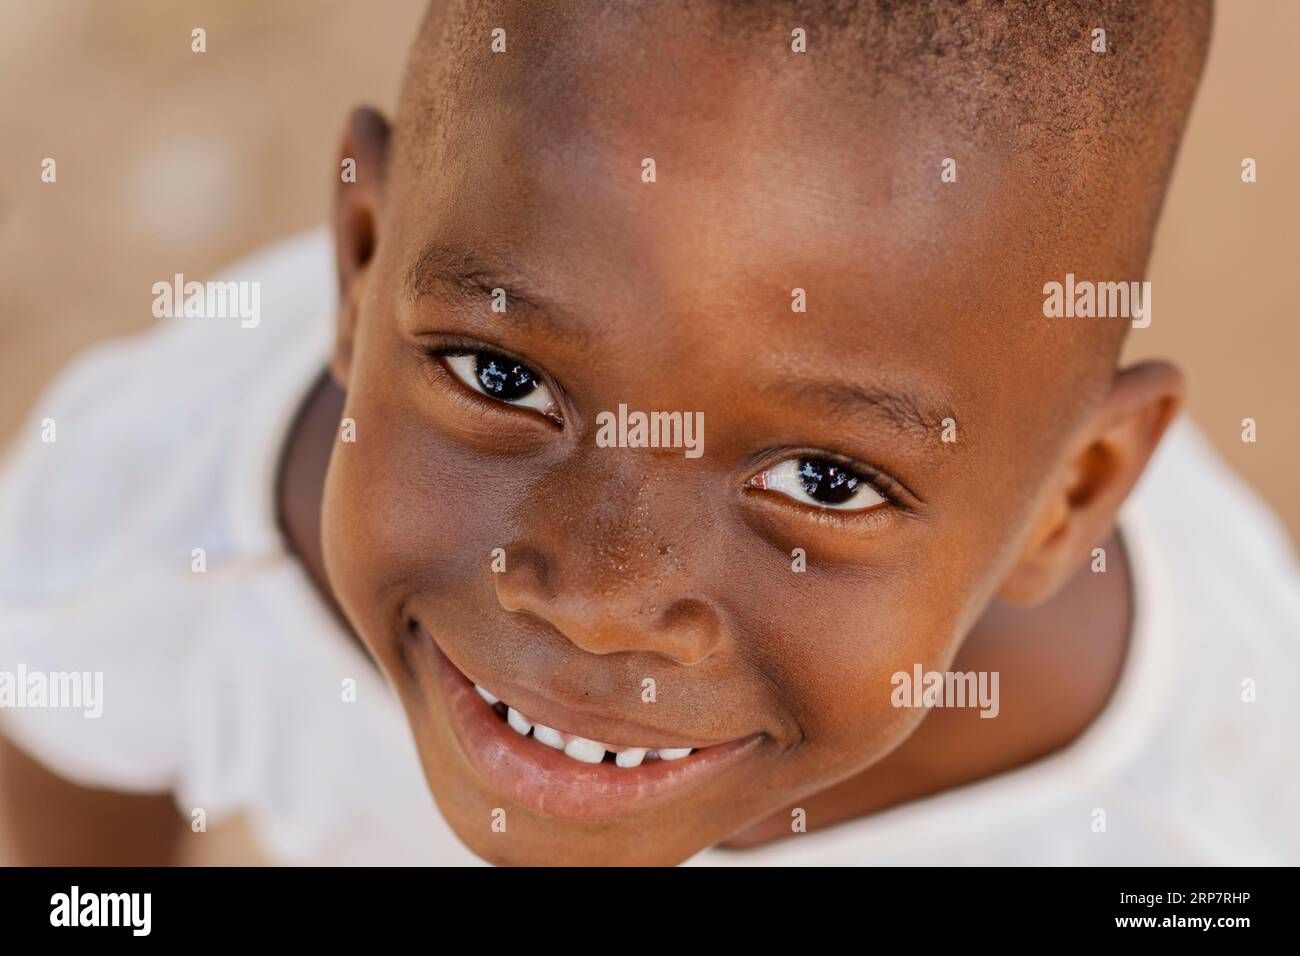 Close up smiley african kid Stock Photo